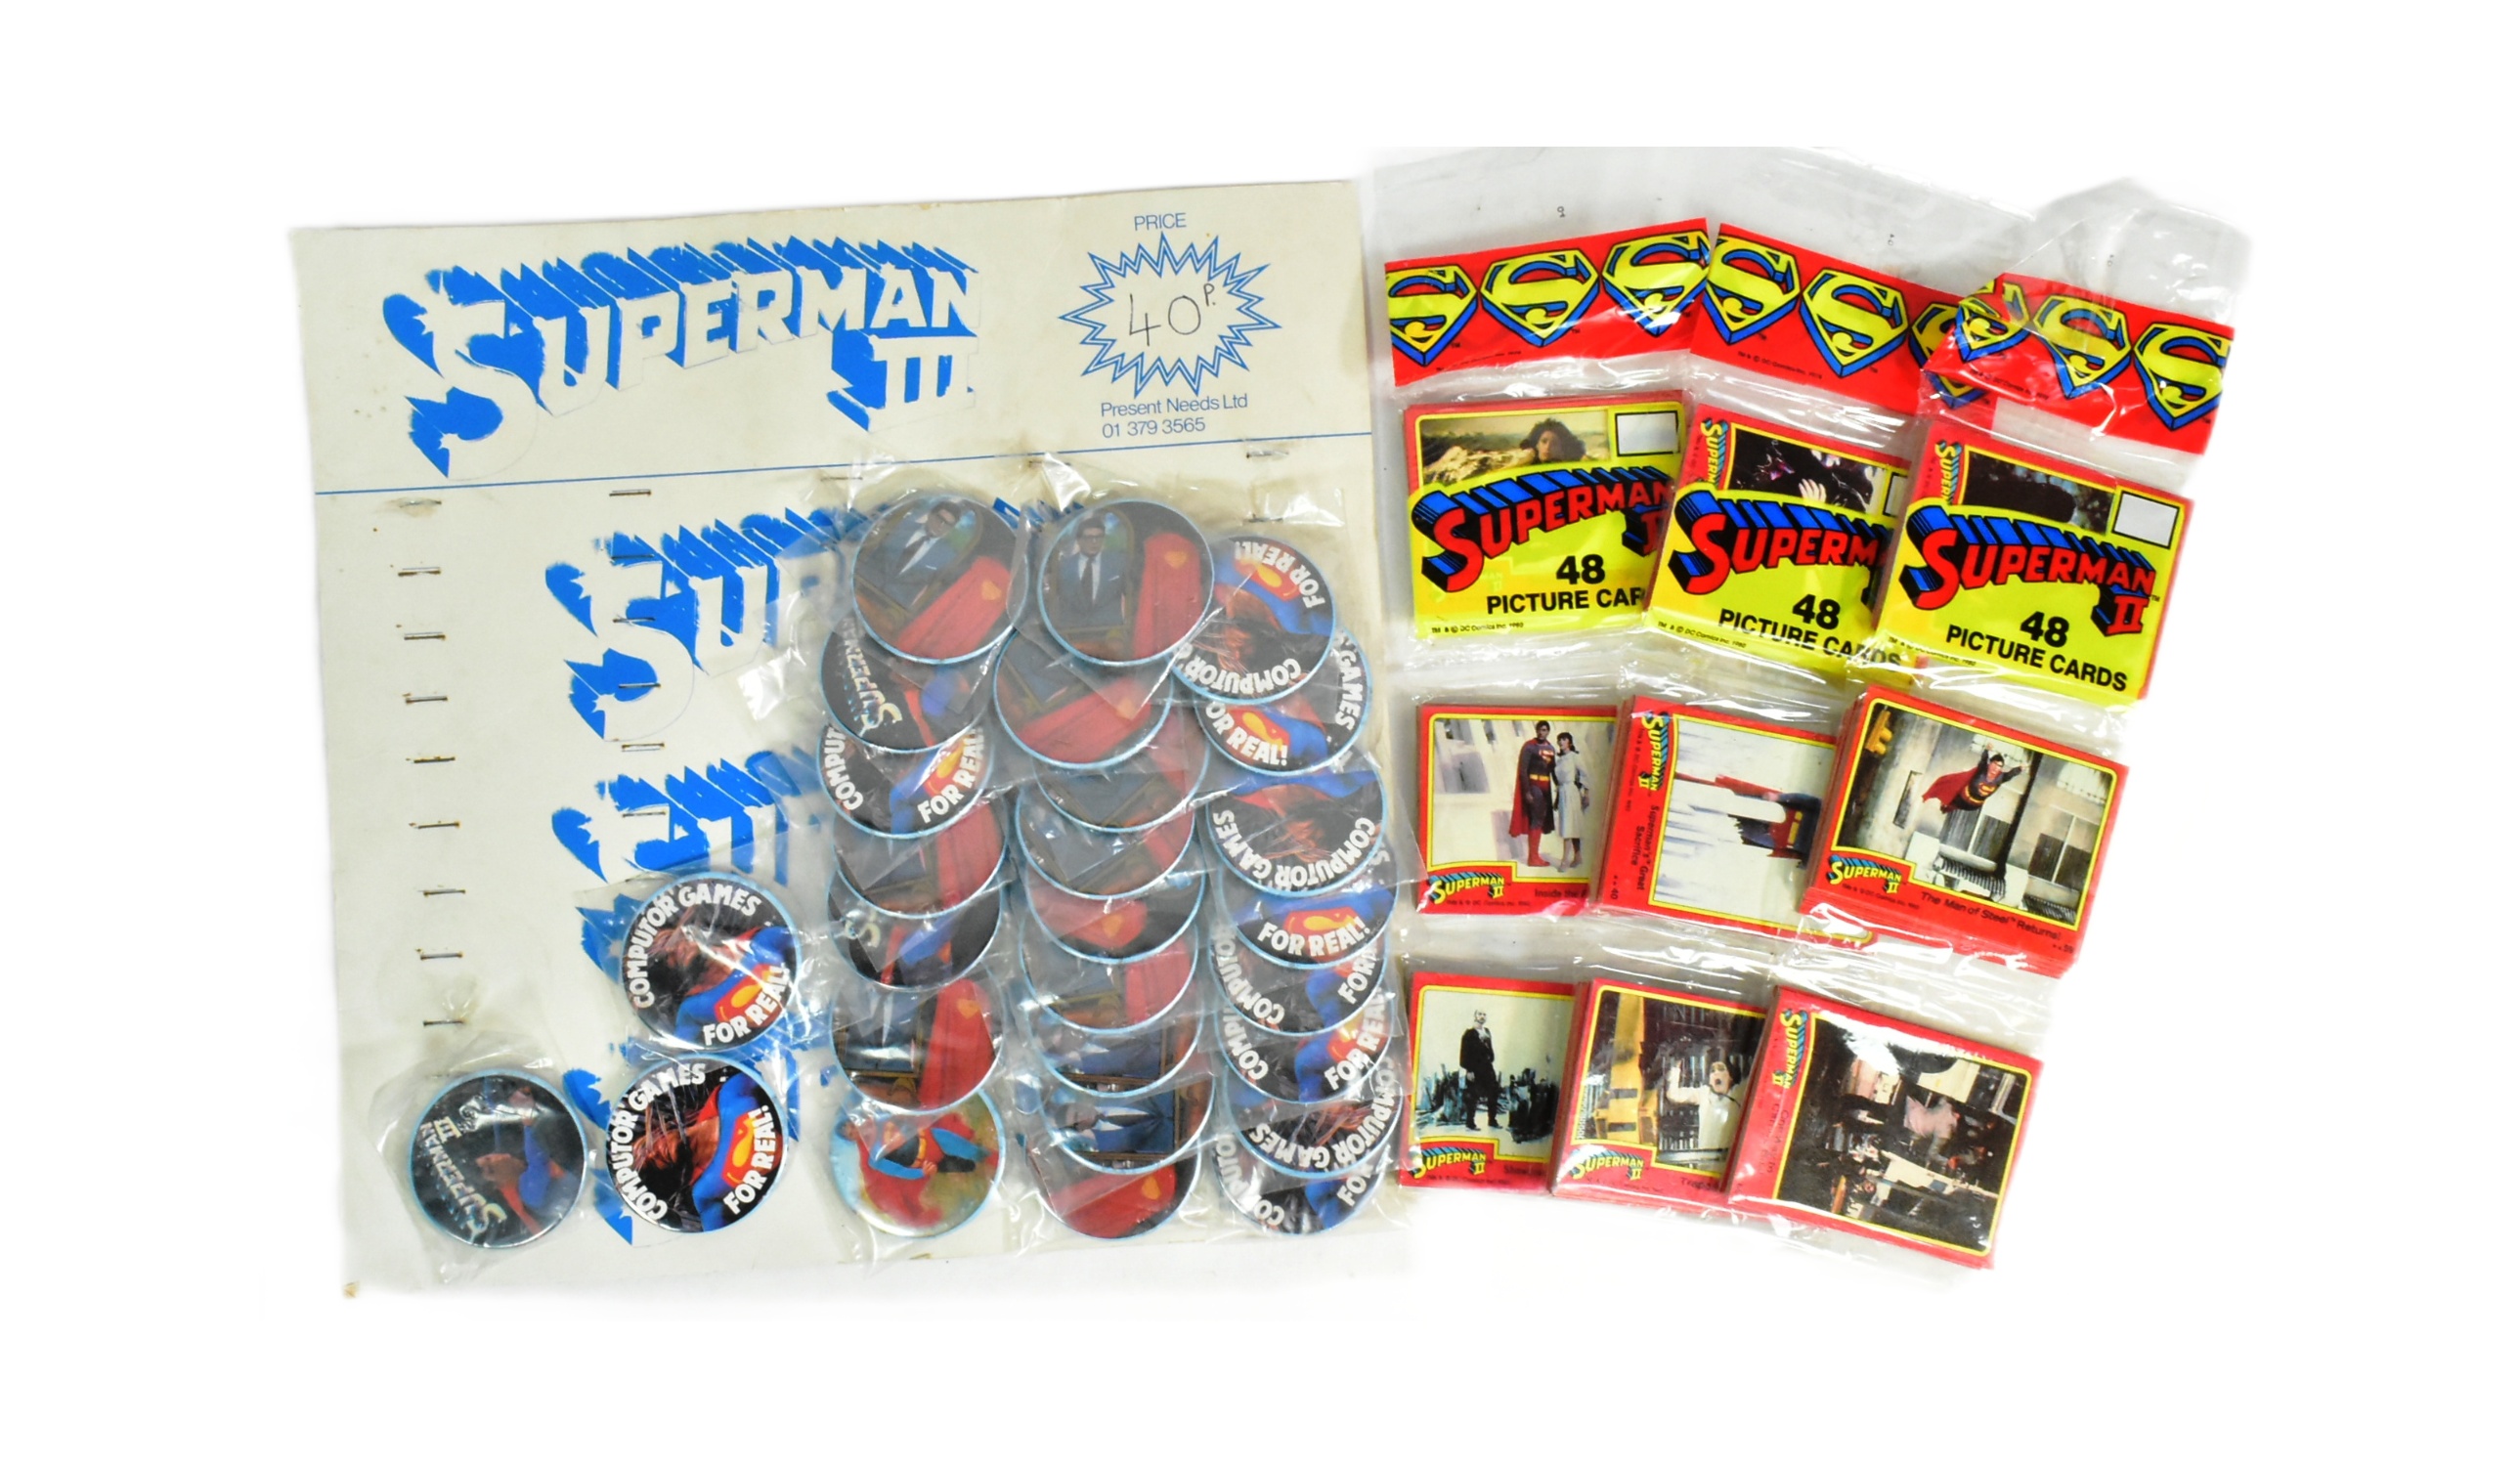 SUPERMAN - VINTAGE TOPPS TRADING CARDS & PHOTO BADGES